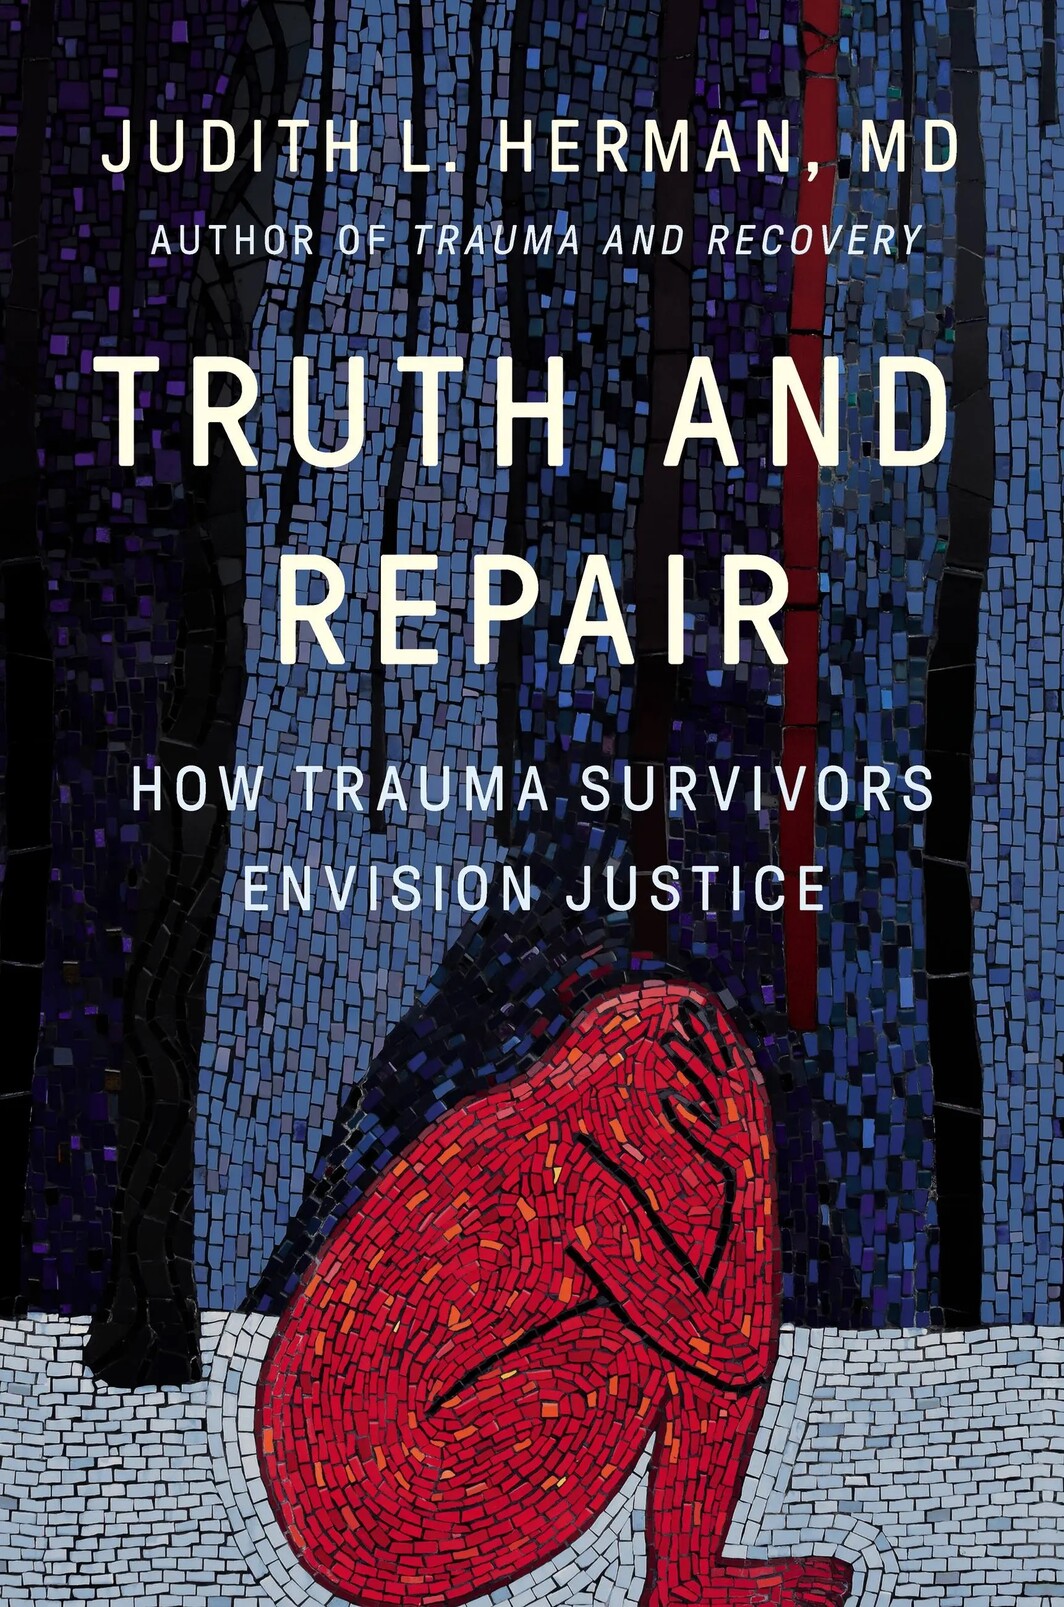 The cover of Truth and Repair: How Trauma Survivors Envision Justice